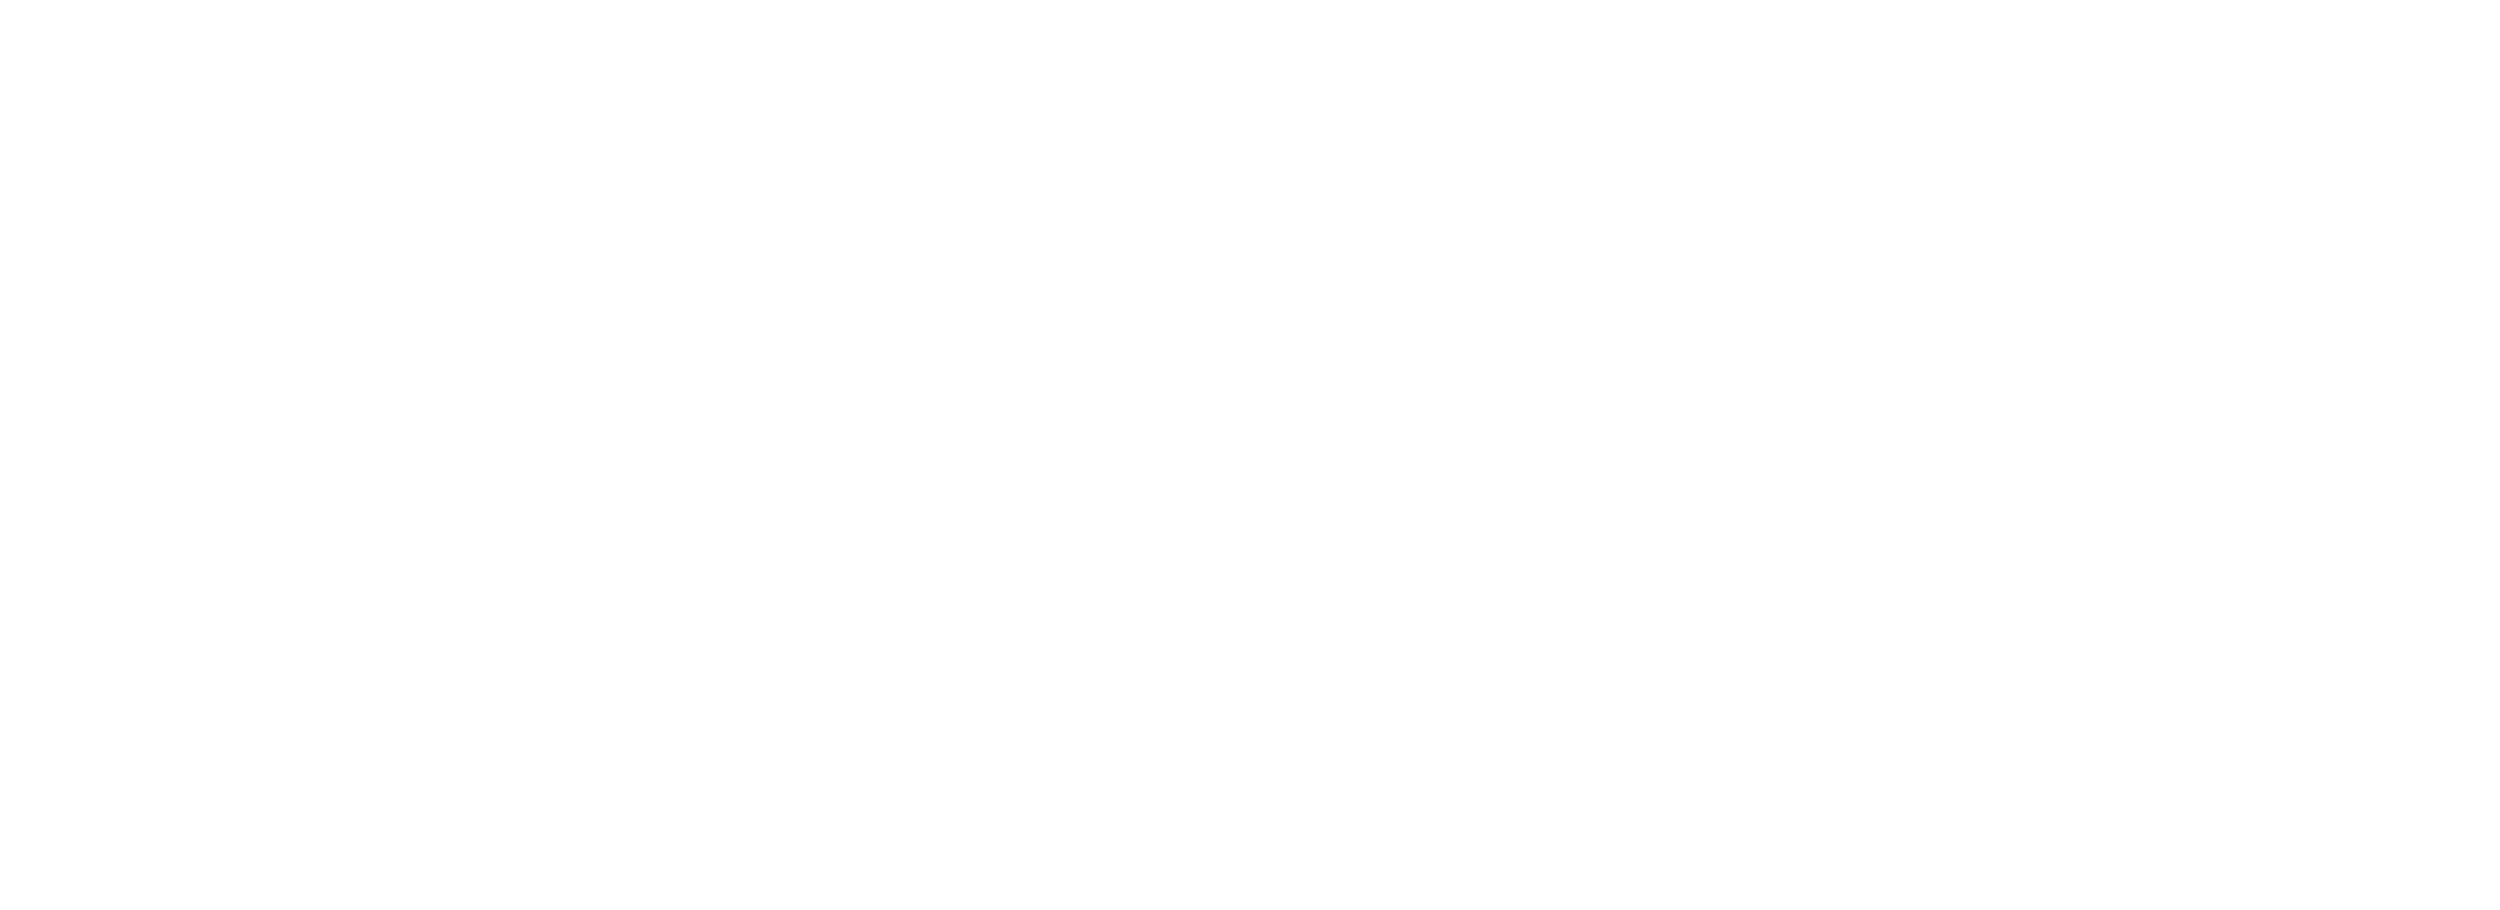 Support Local App